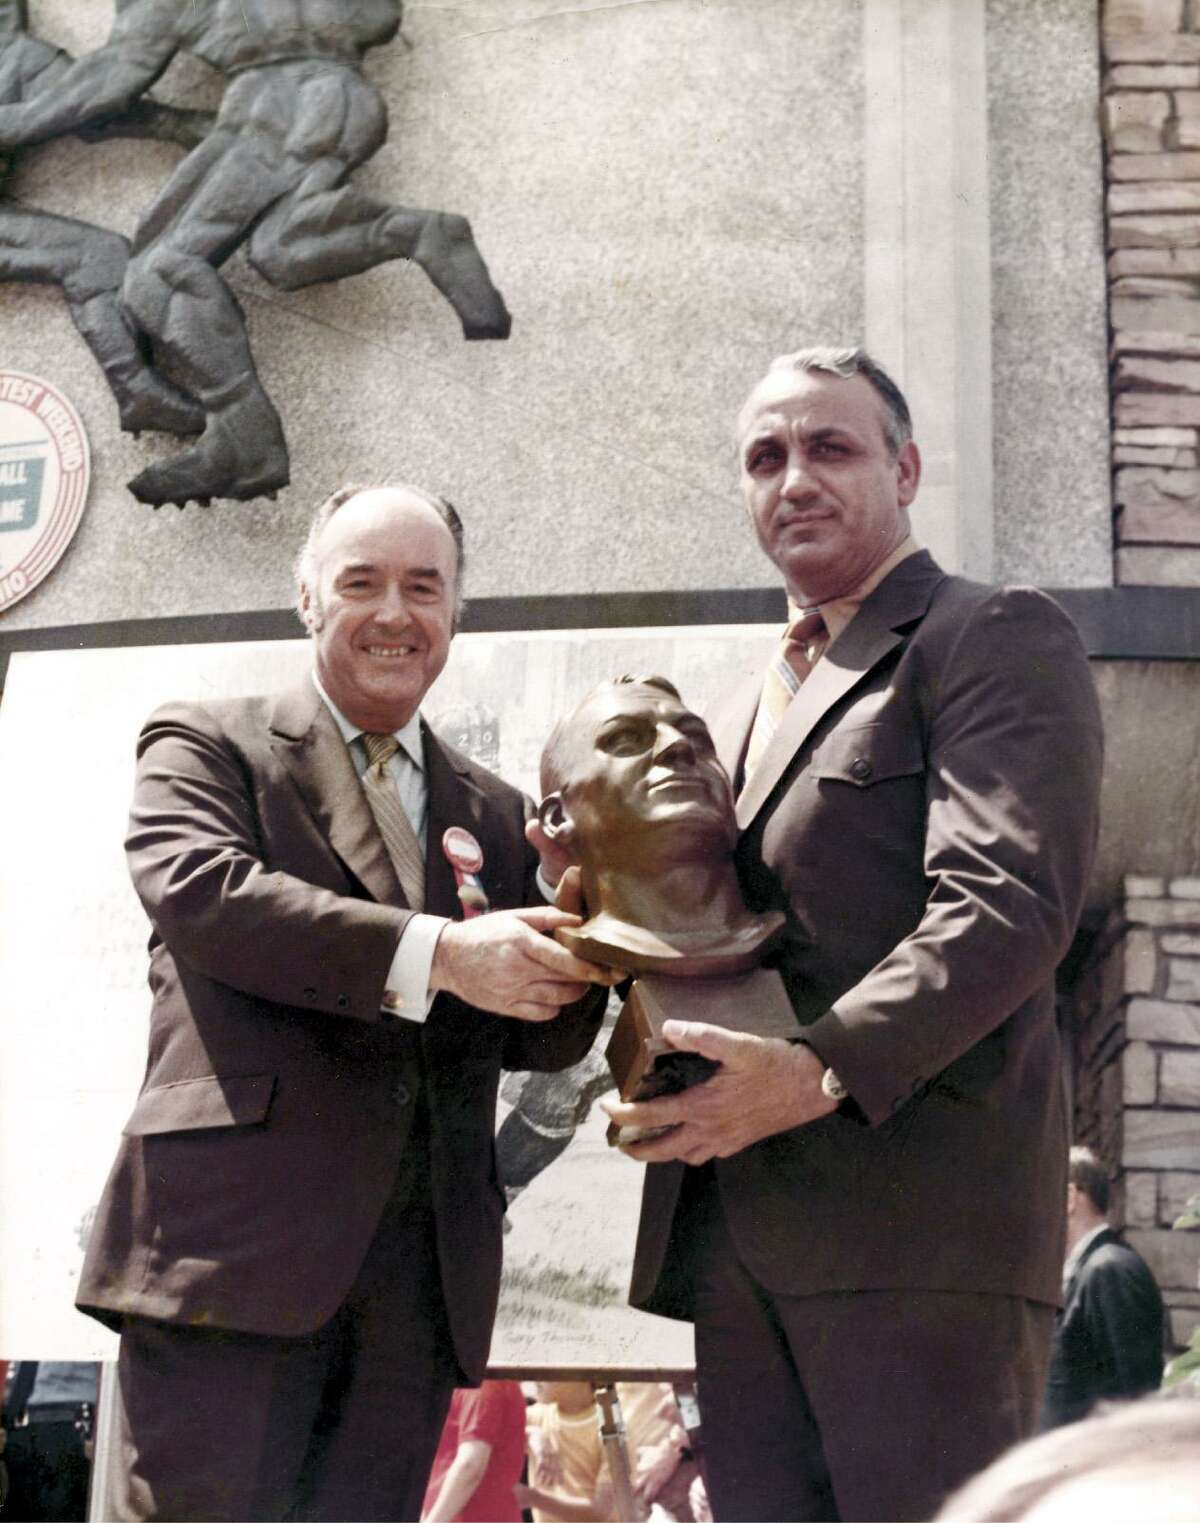 J. Walter Kennedy, left, and Andy Robustelli at Robustelli’s induction into the Pro Football Hall of Fame in 1971. Kennedy, a former Stamford mayor, was National Basketball Association commissioner from 1963-1975. Robustelli, an eight-time All-Pro, was a standout with the Los Angeles Rams and New York Giants.